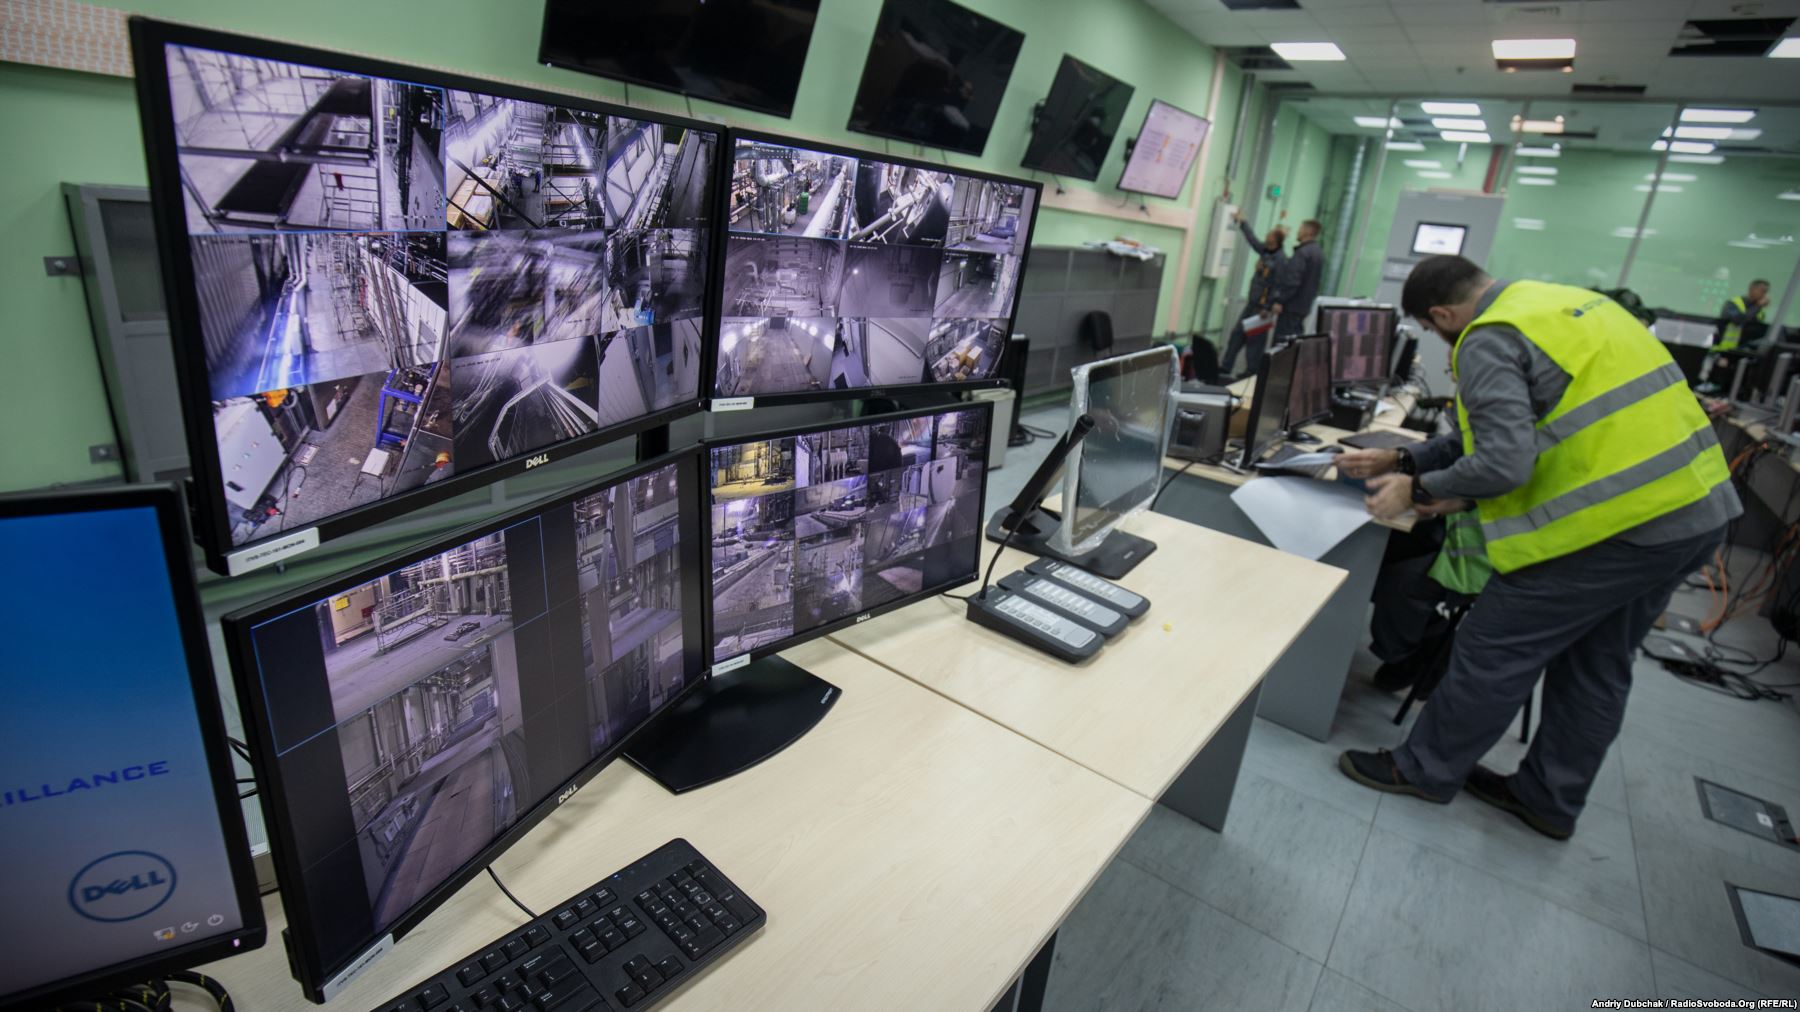 Dozens of robotic cameras are located throughout Chernobyl's New Safe Confinement (NSC). Steaming video is monitored from the structure's main control room known as the Confinement Management Center (CMC). The containment structure is also equipped with automated fire-suppression systems. Photo by: Andriy Dubchak